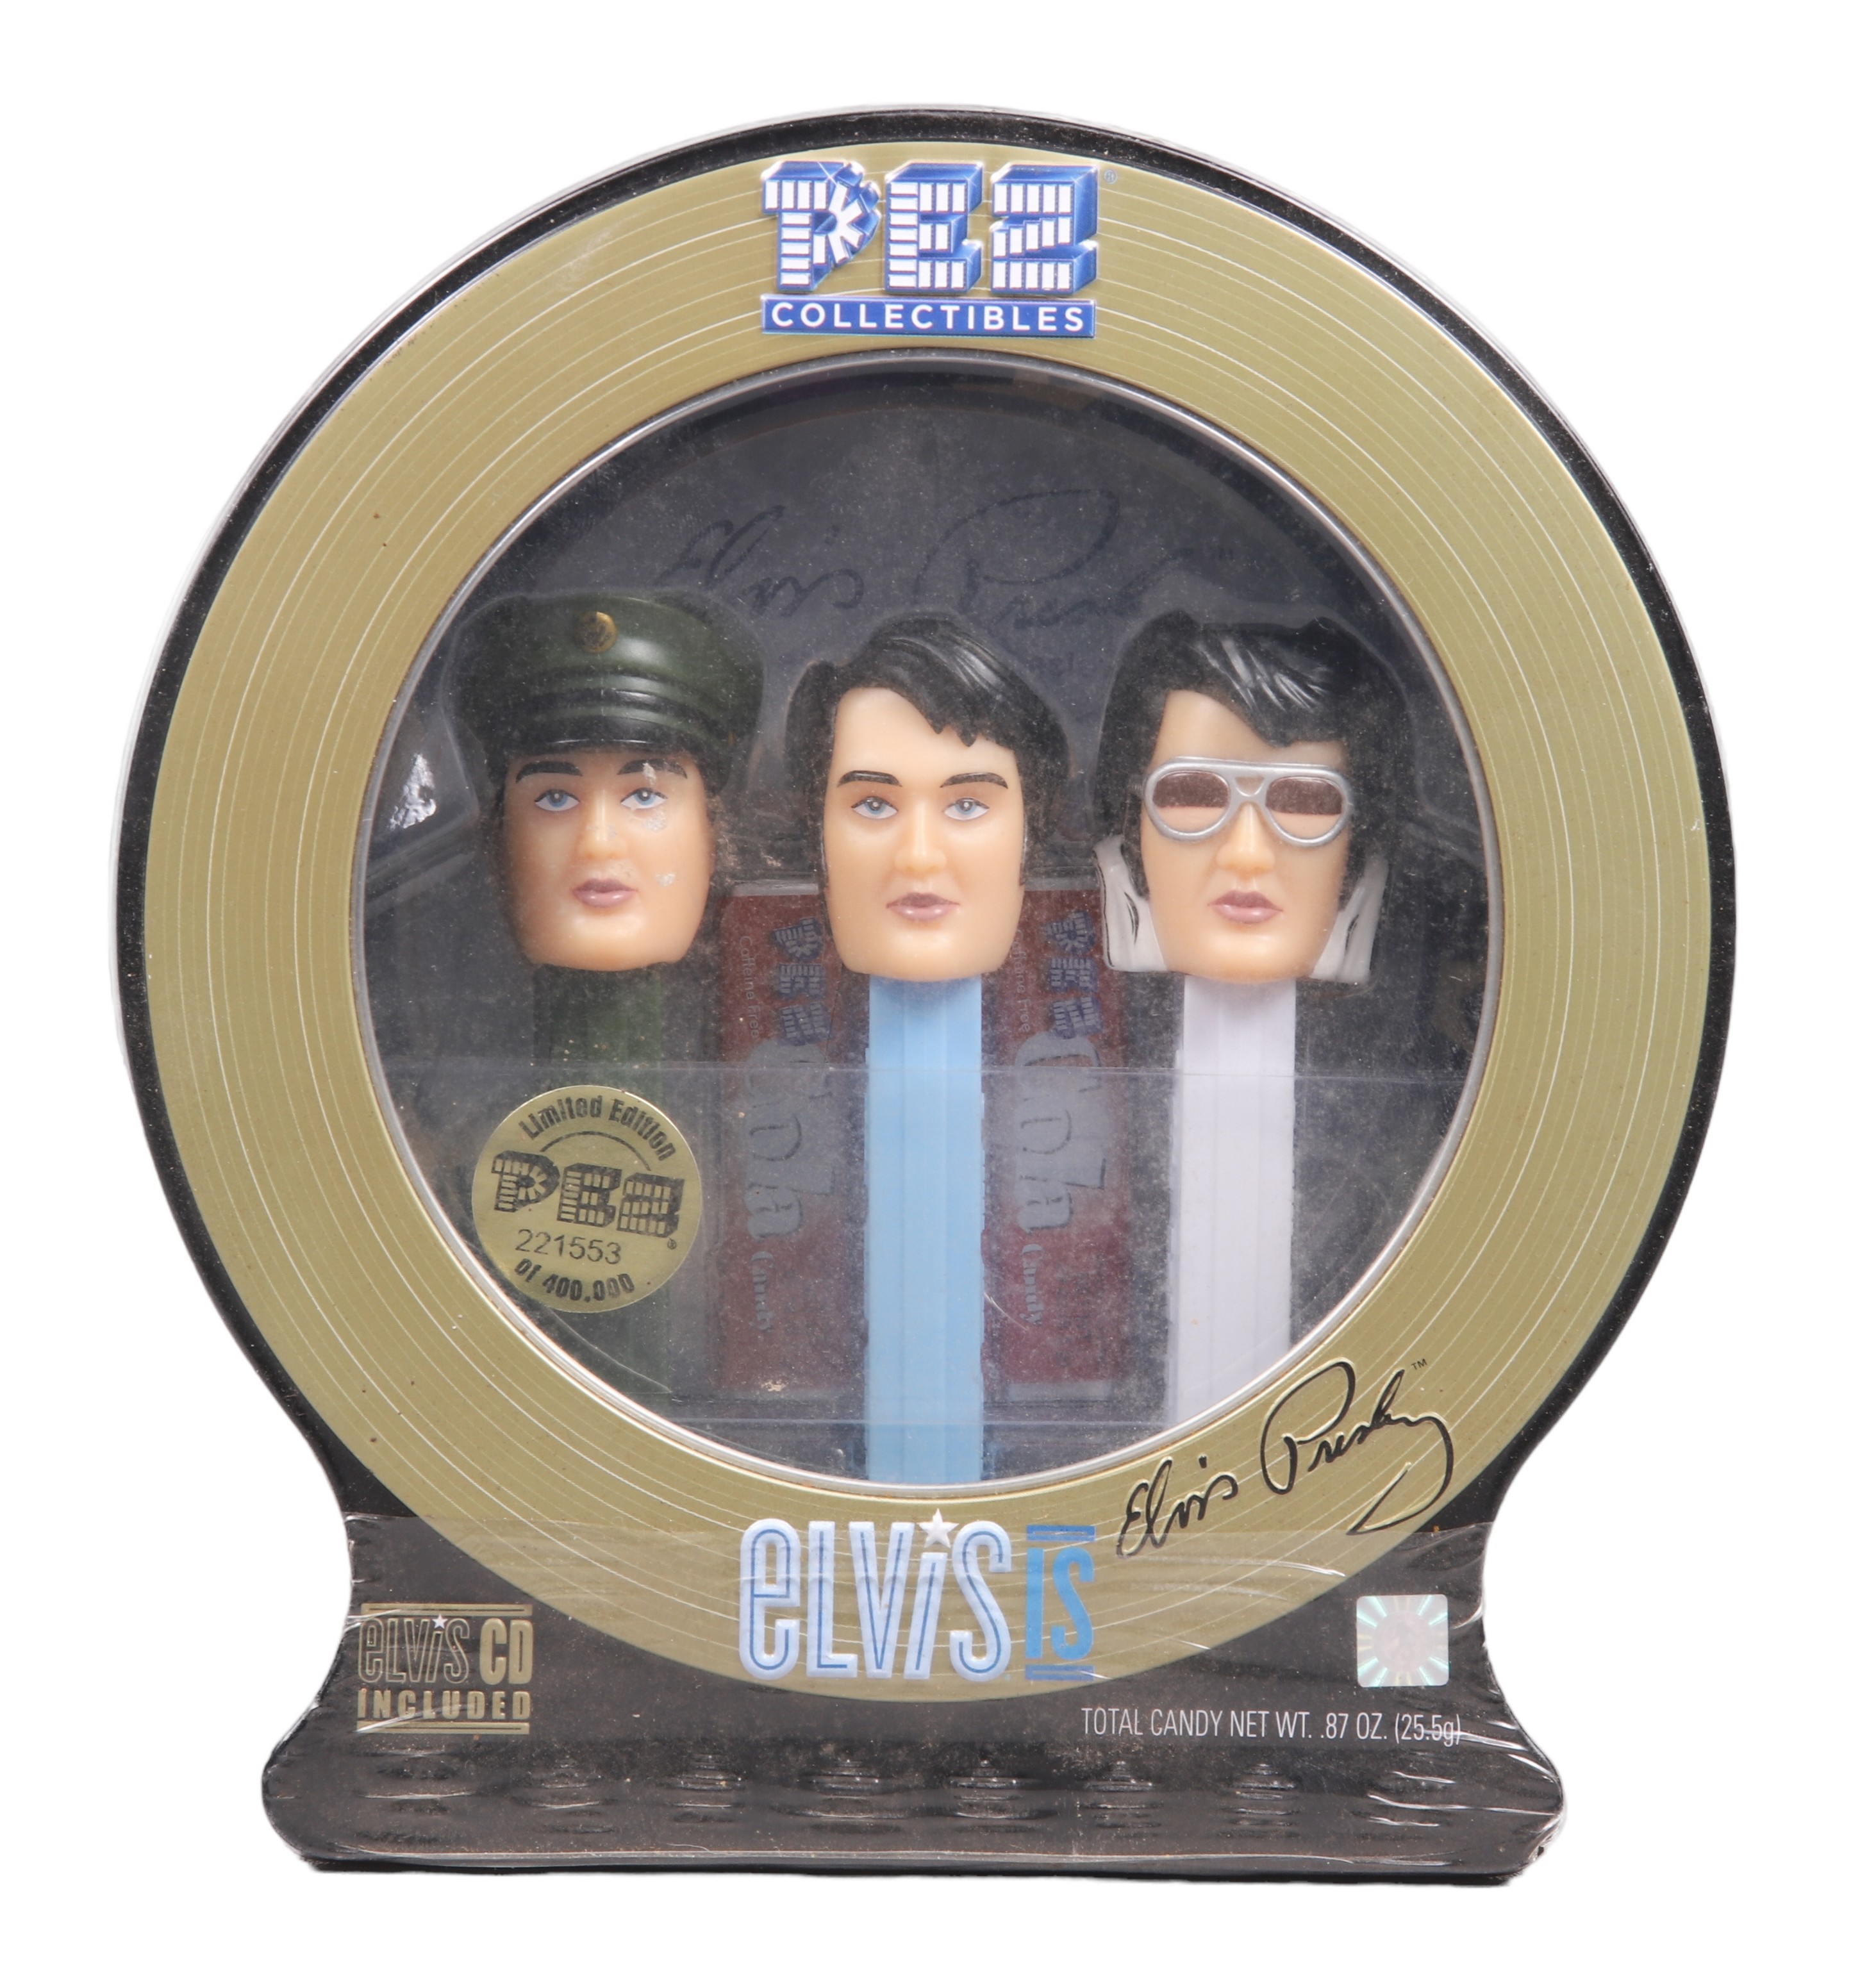 Elvis pez collection with CD in 2e1162